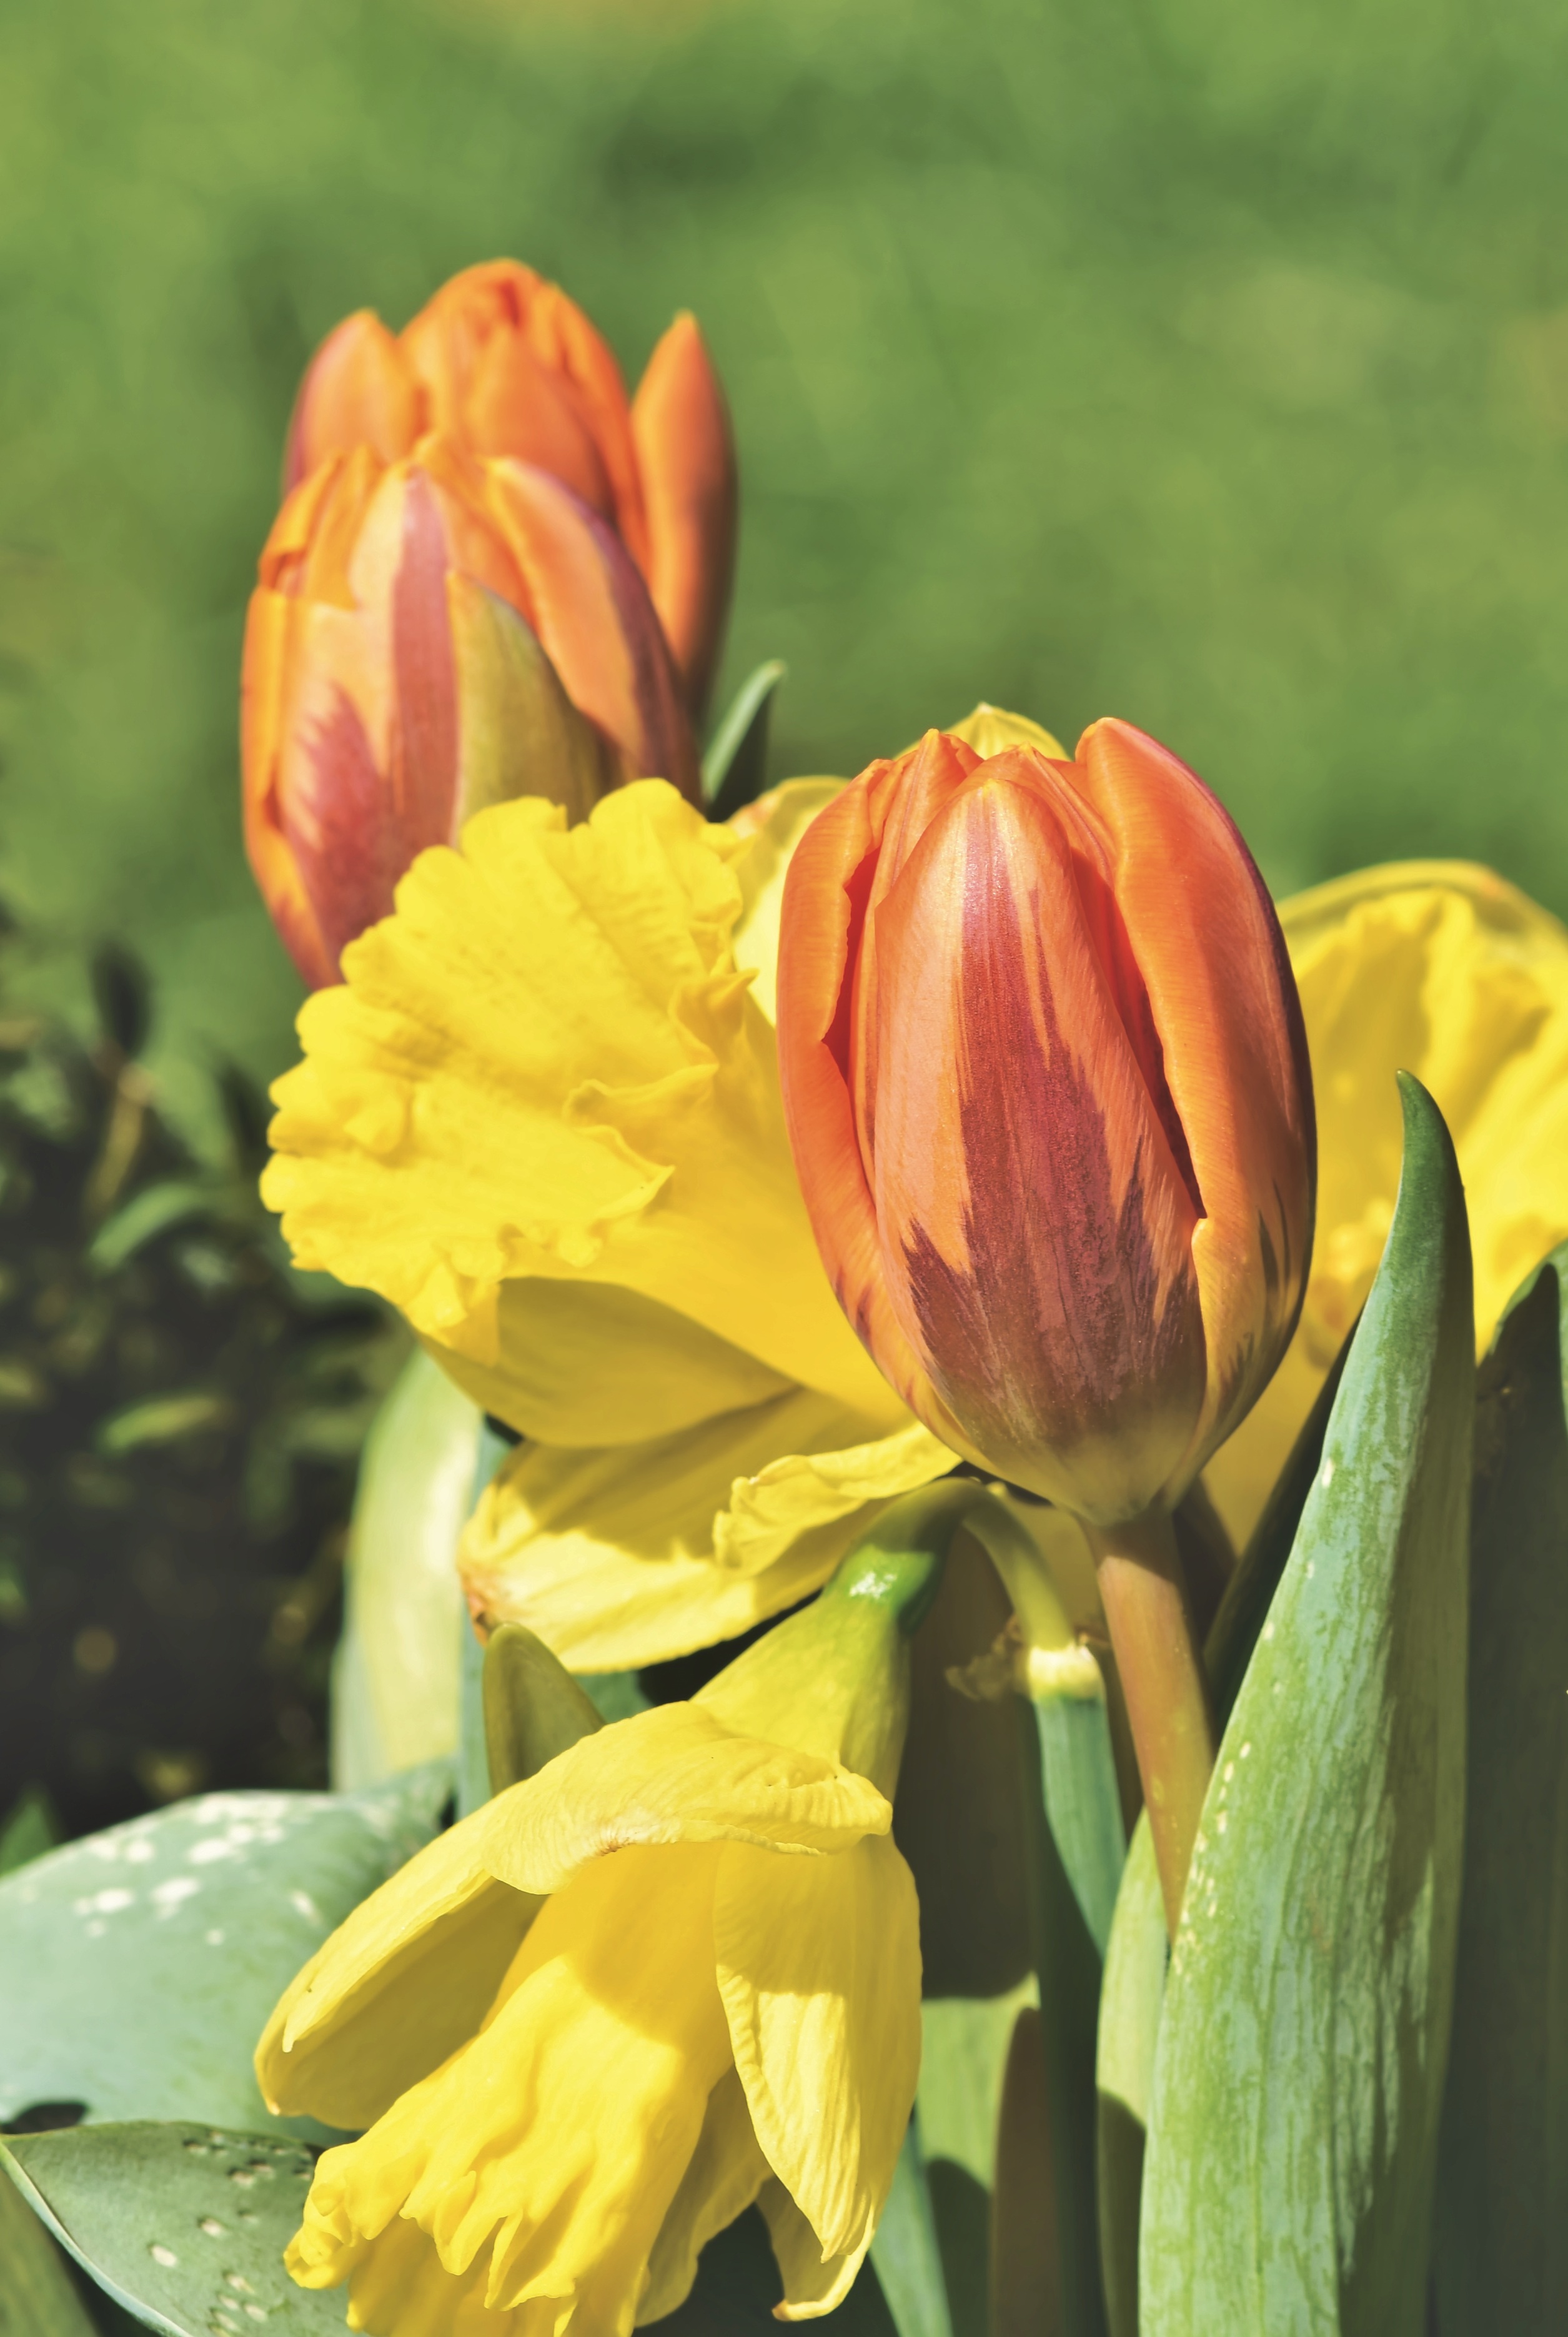 Tulip Bouquet Of Flowers Blossom free image download